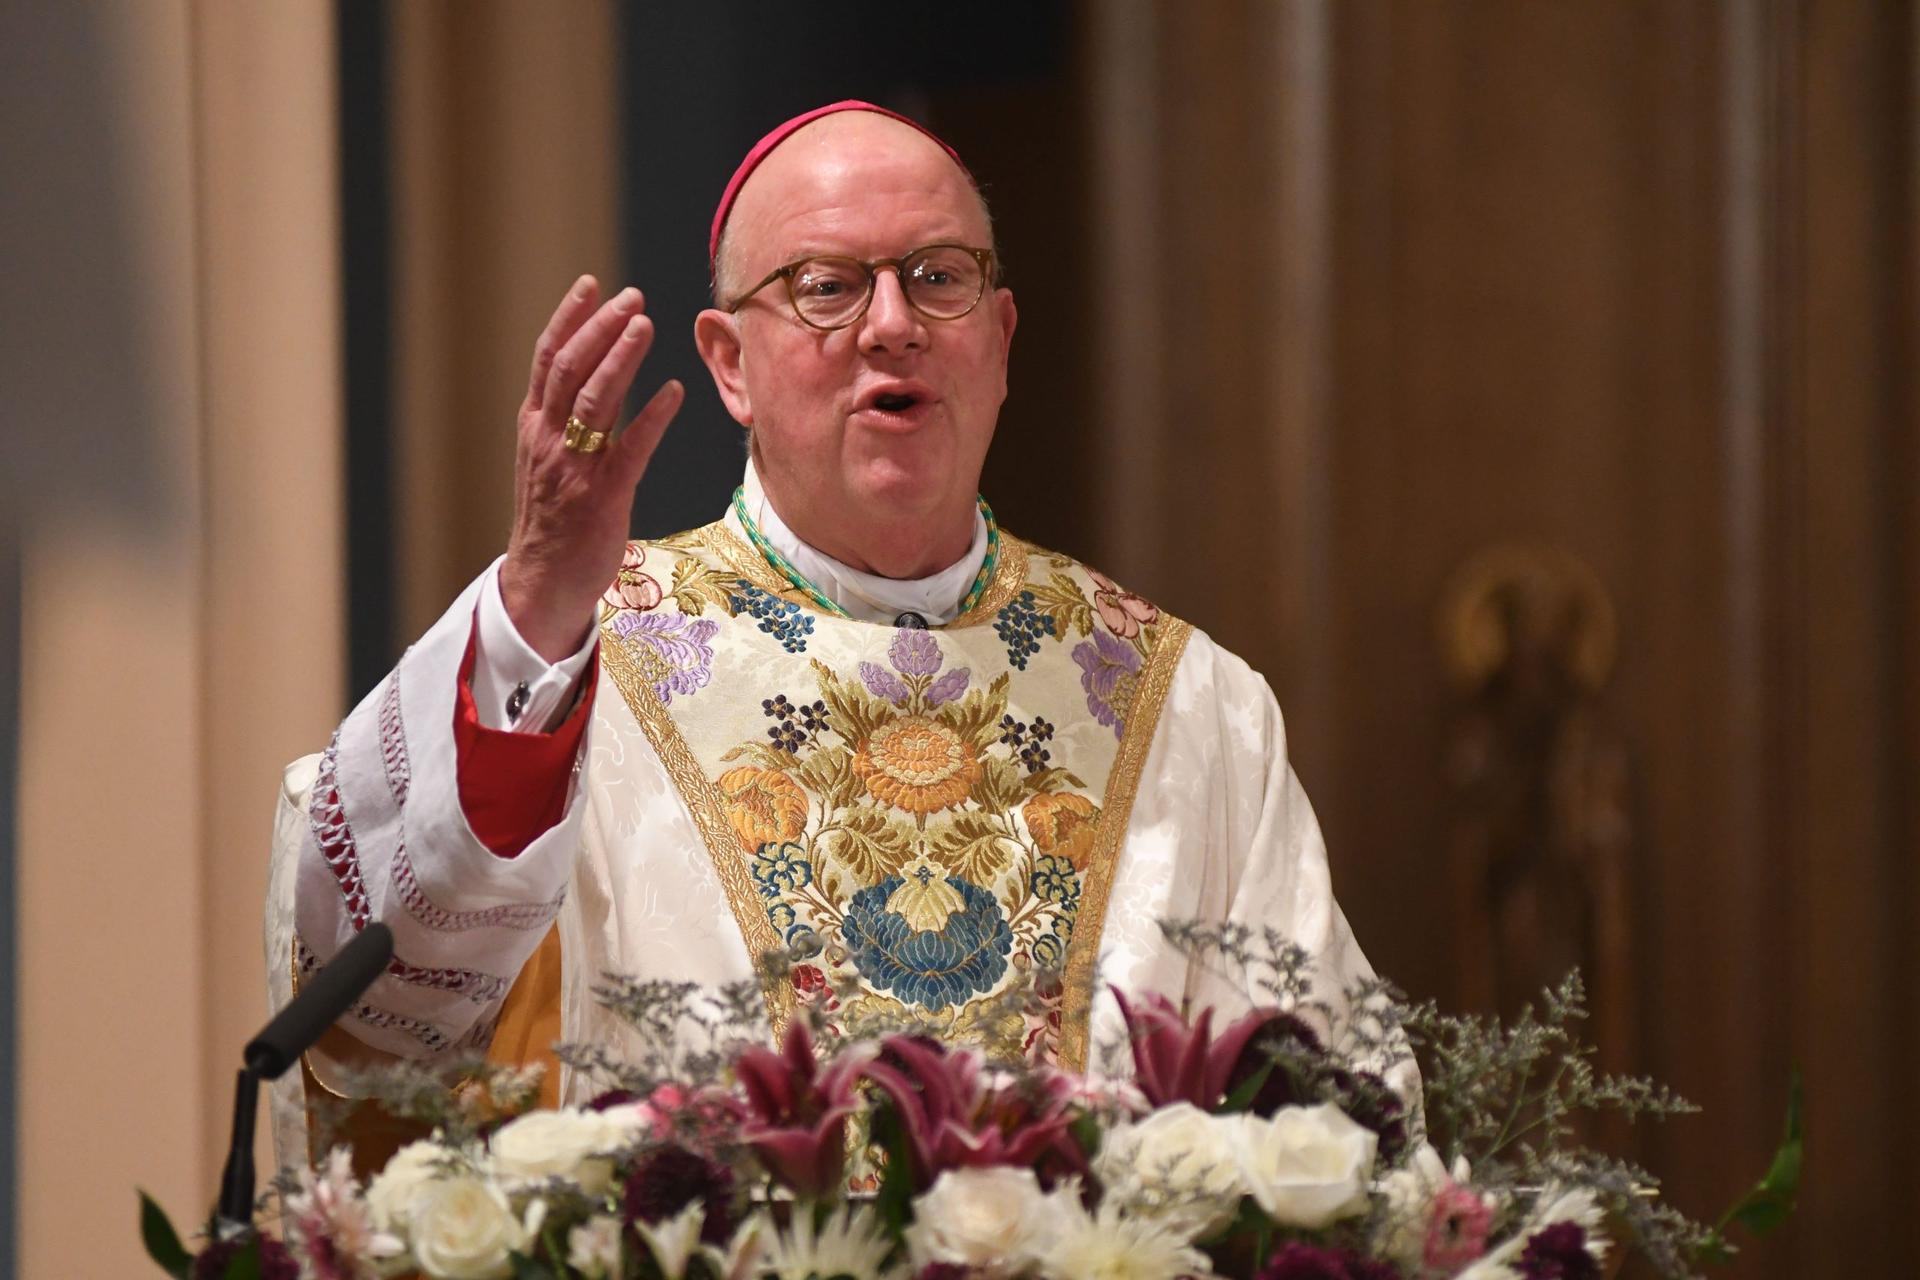 Springfield’s bishop promises, like Peter, to love Jesus, care for his people